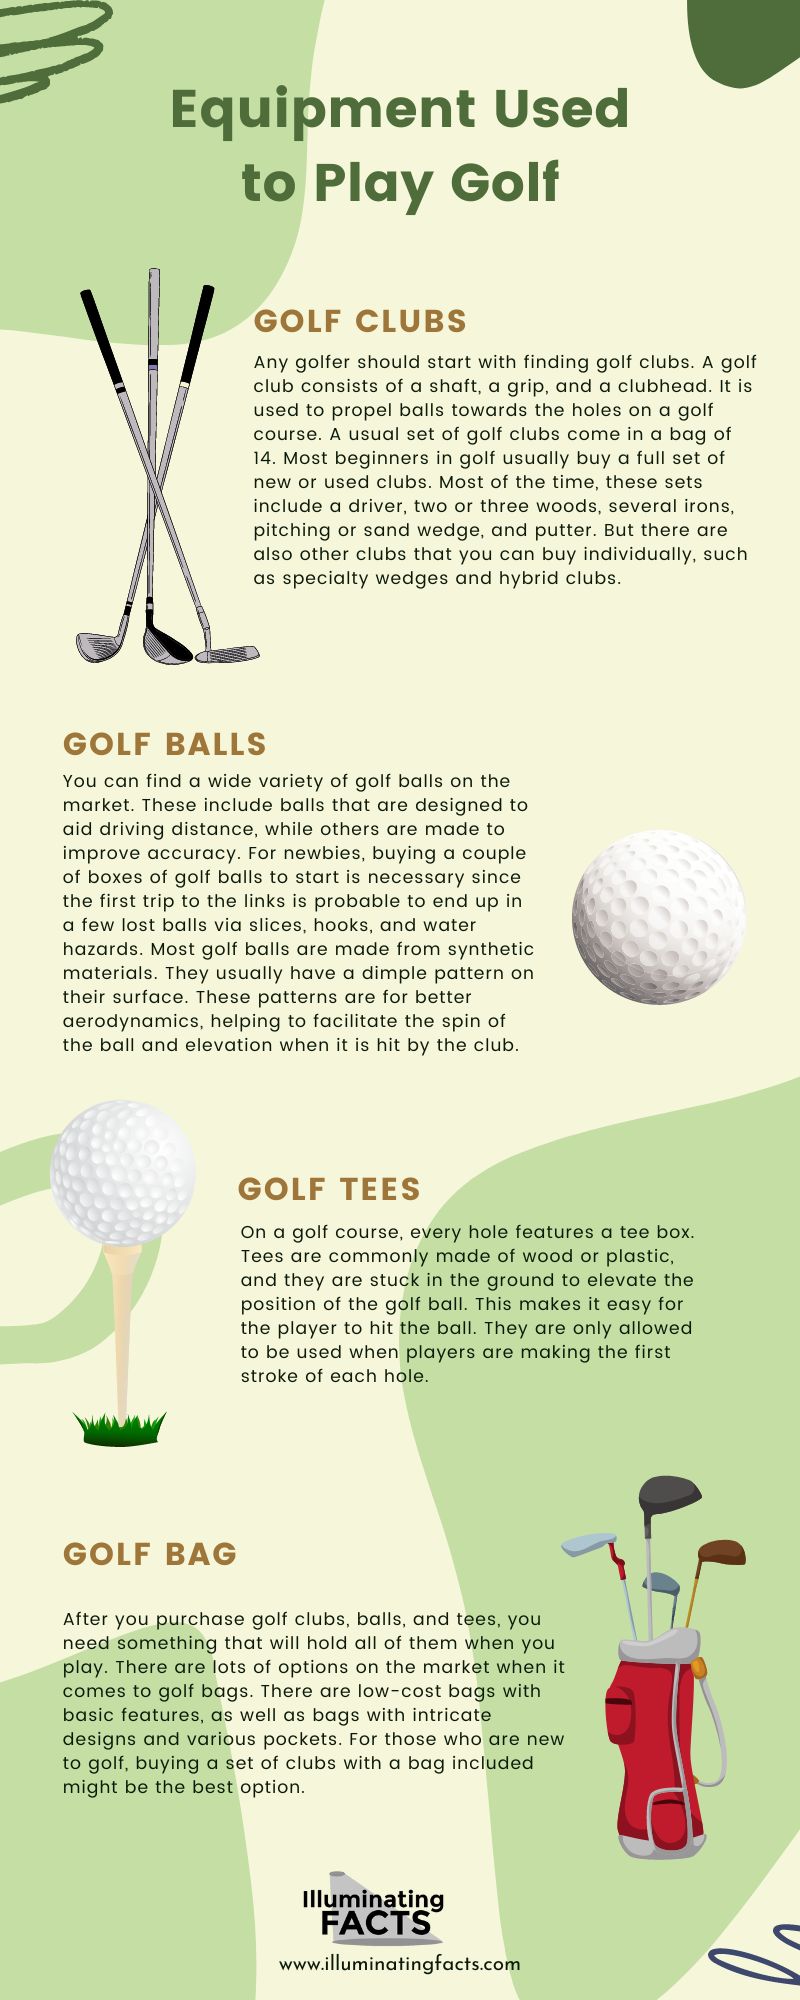 Equipment Used to Play Golf